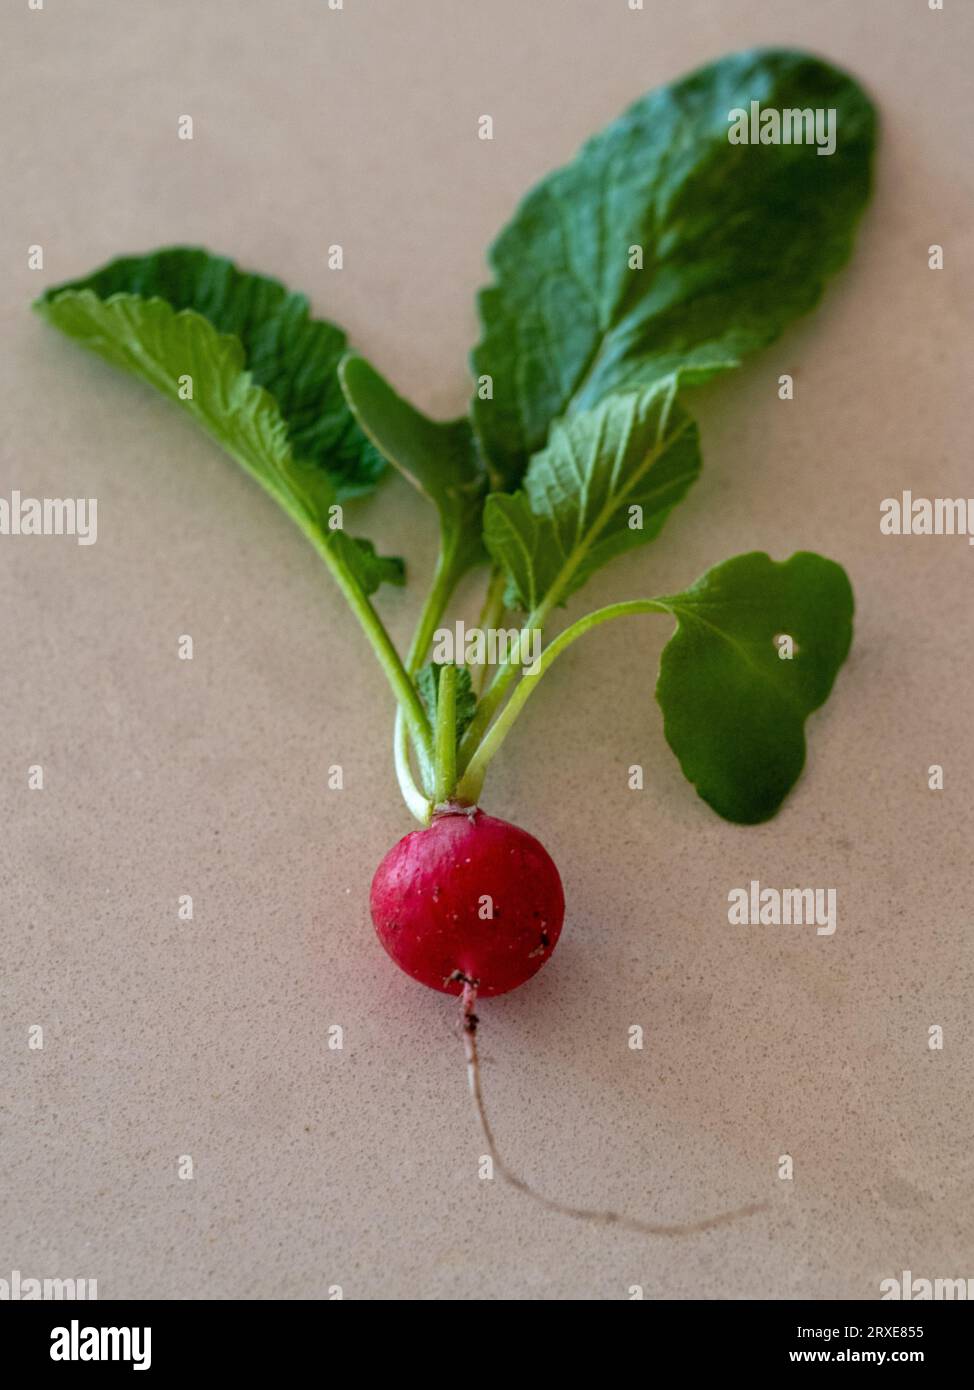 A single red radish with green leaves on a light kitchen bench-top, freshly pulled from the vegetable garden Stock Photo